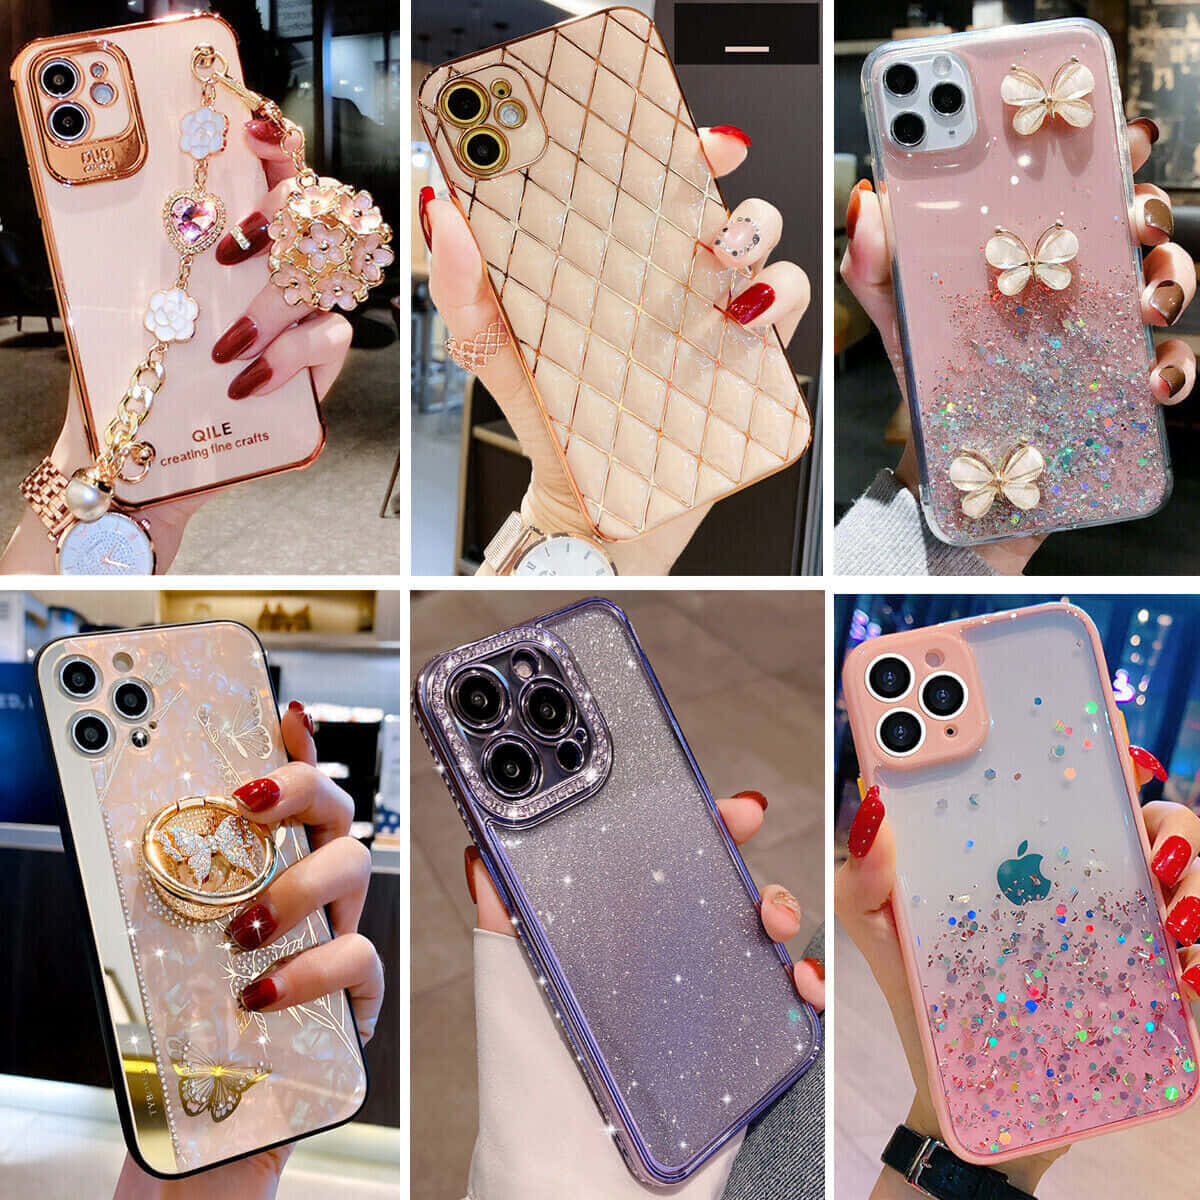 A Series Of Pictures Of Different Iphone Cases